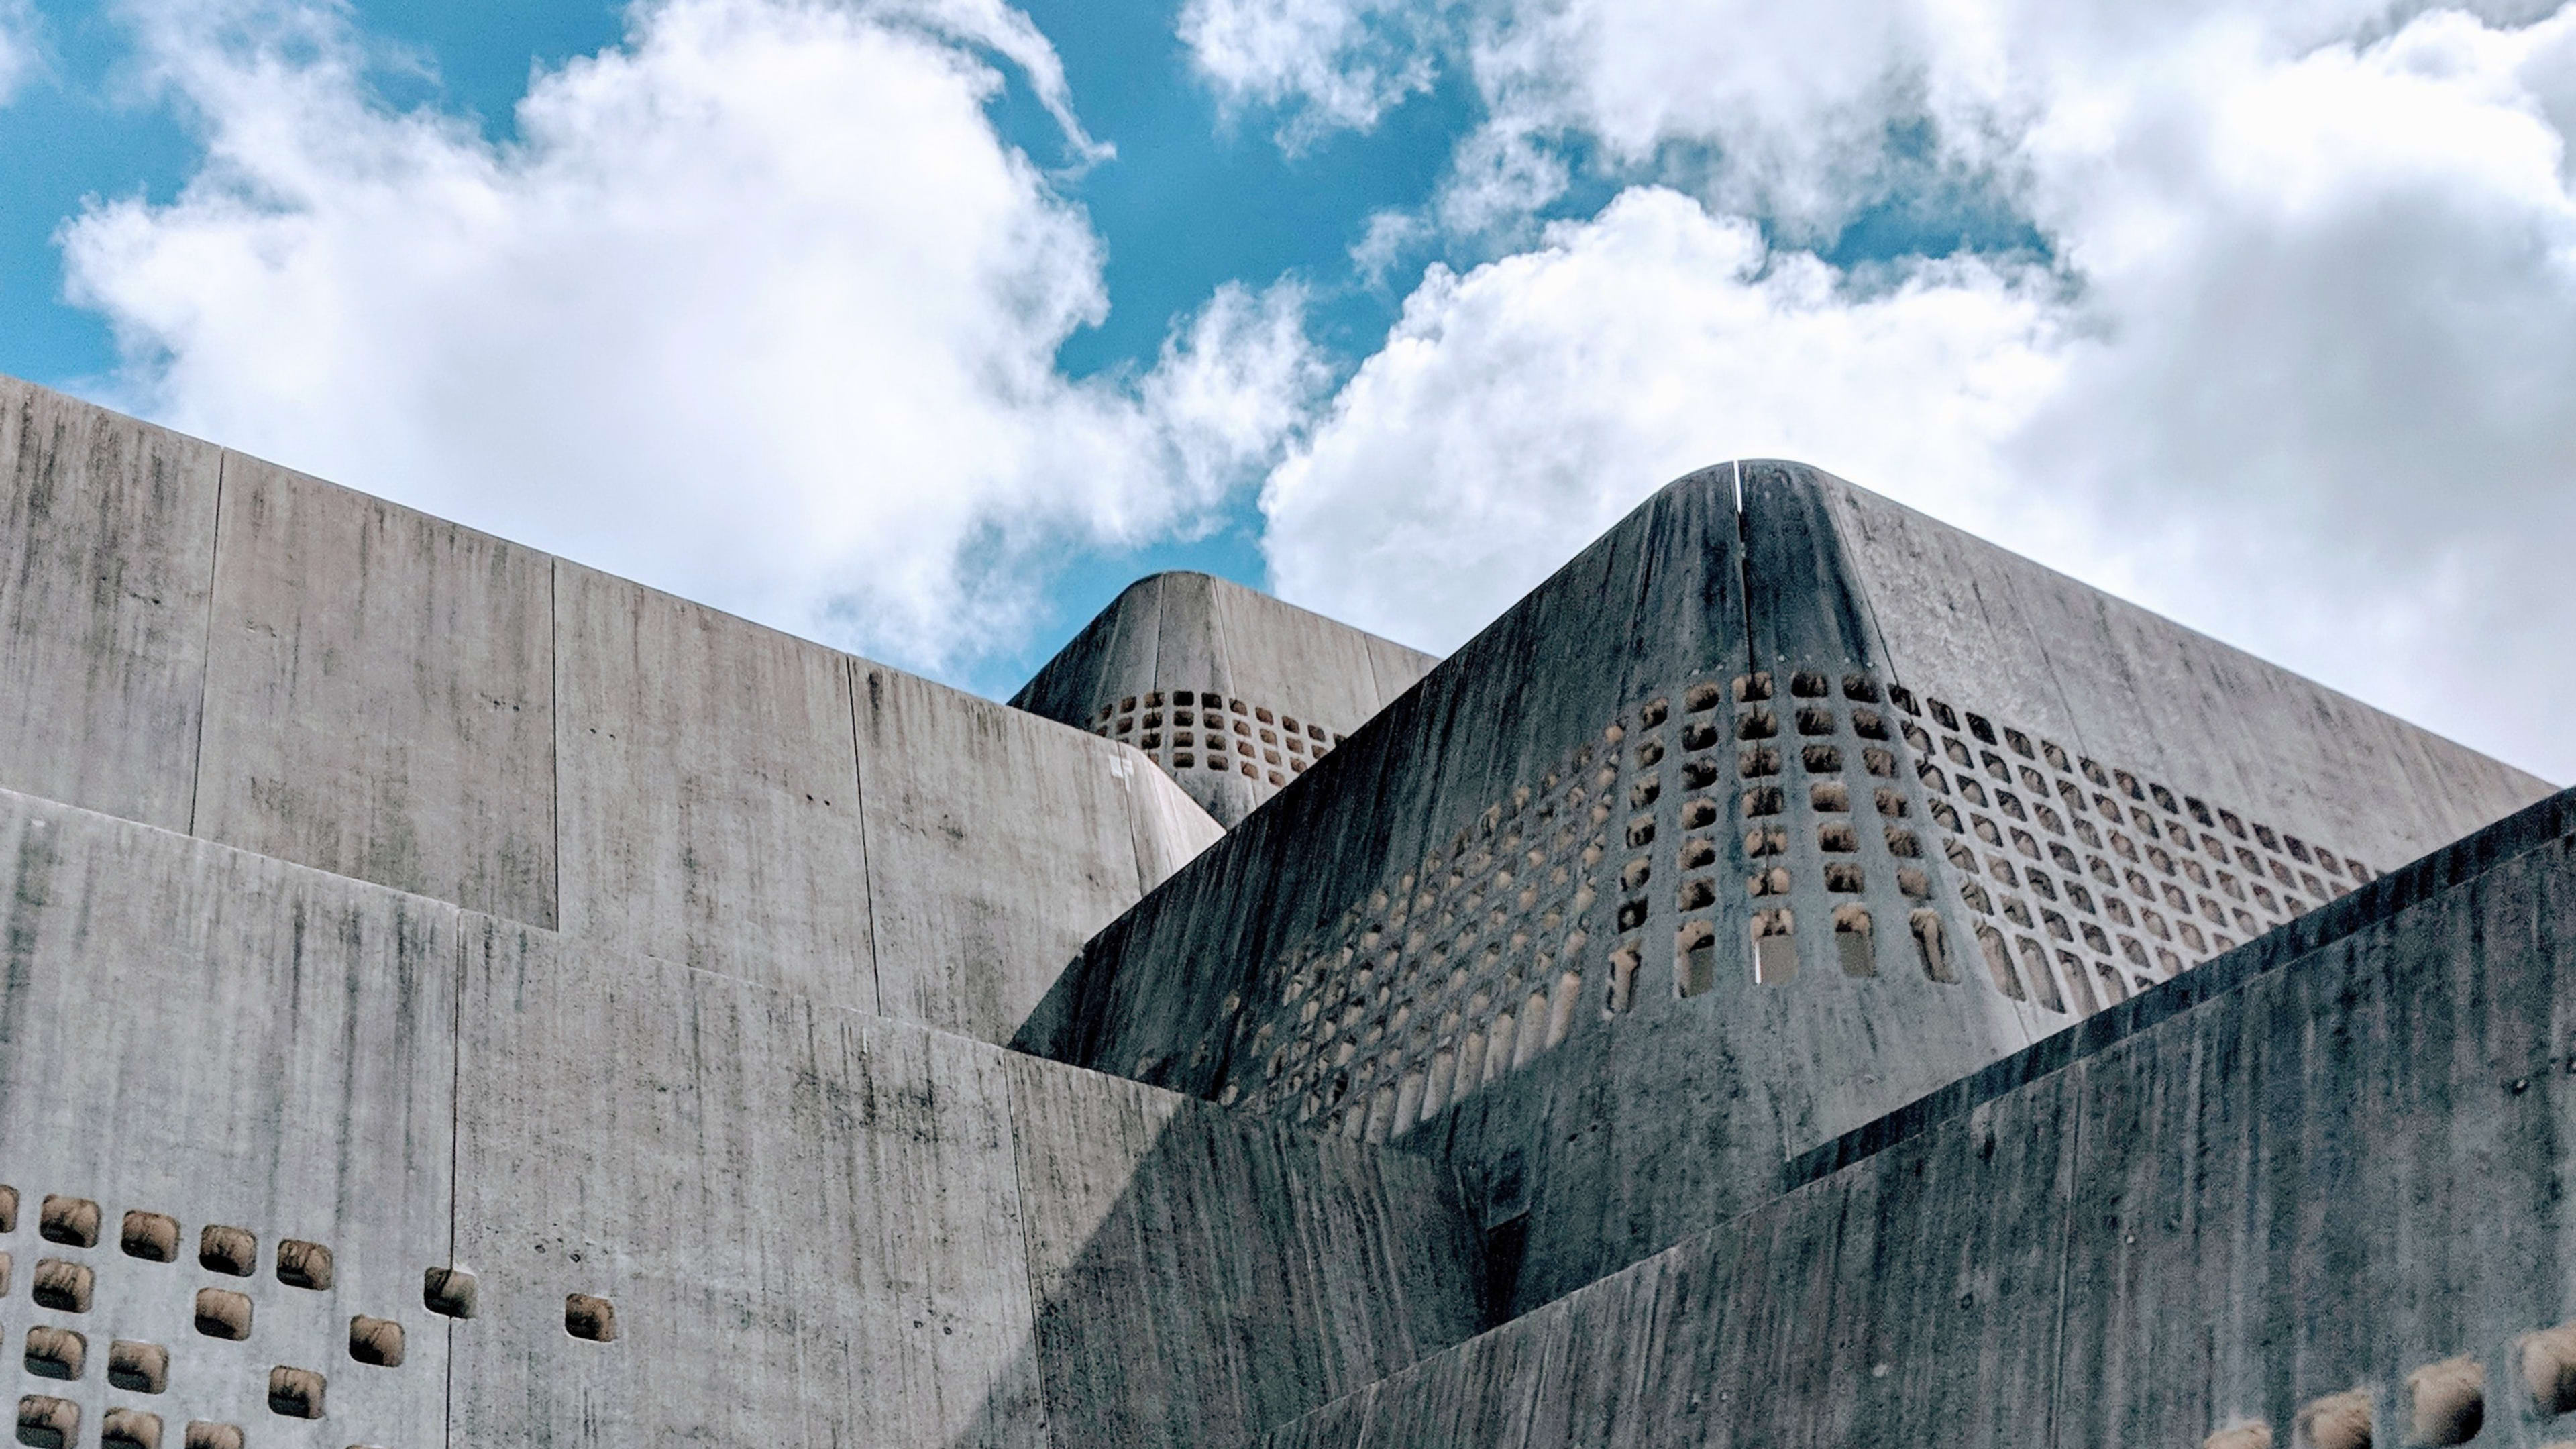 On this Japanese island, nearly every building is made of concrete